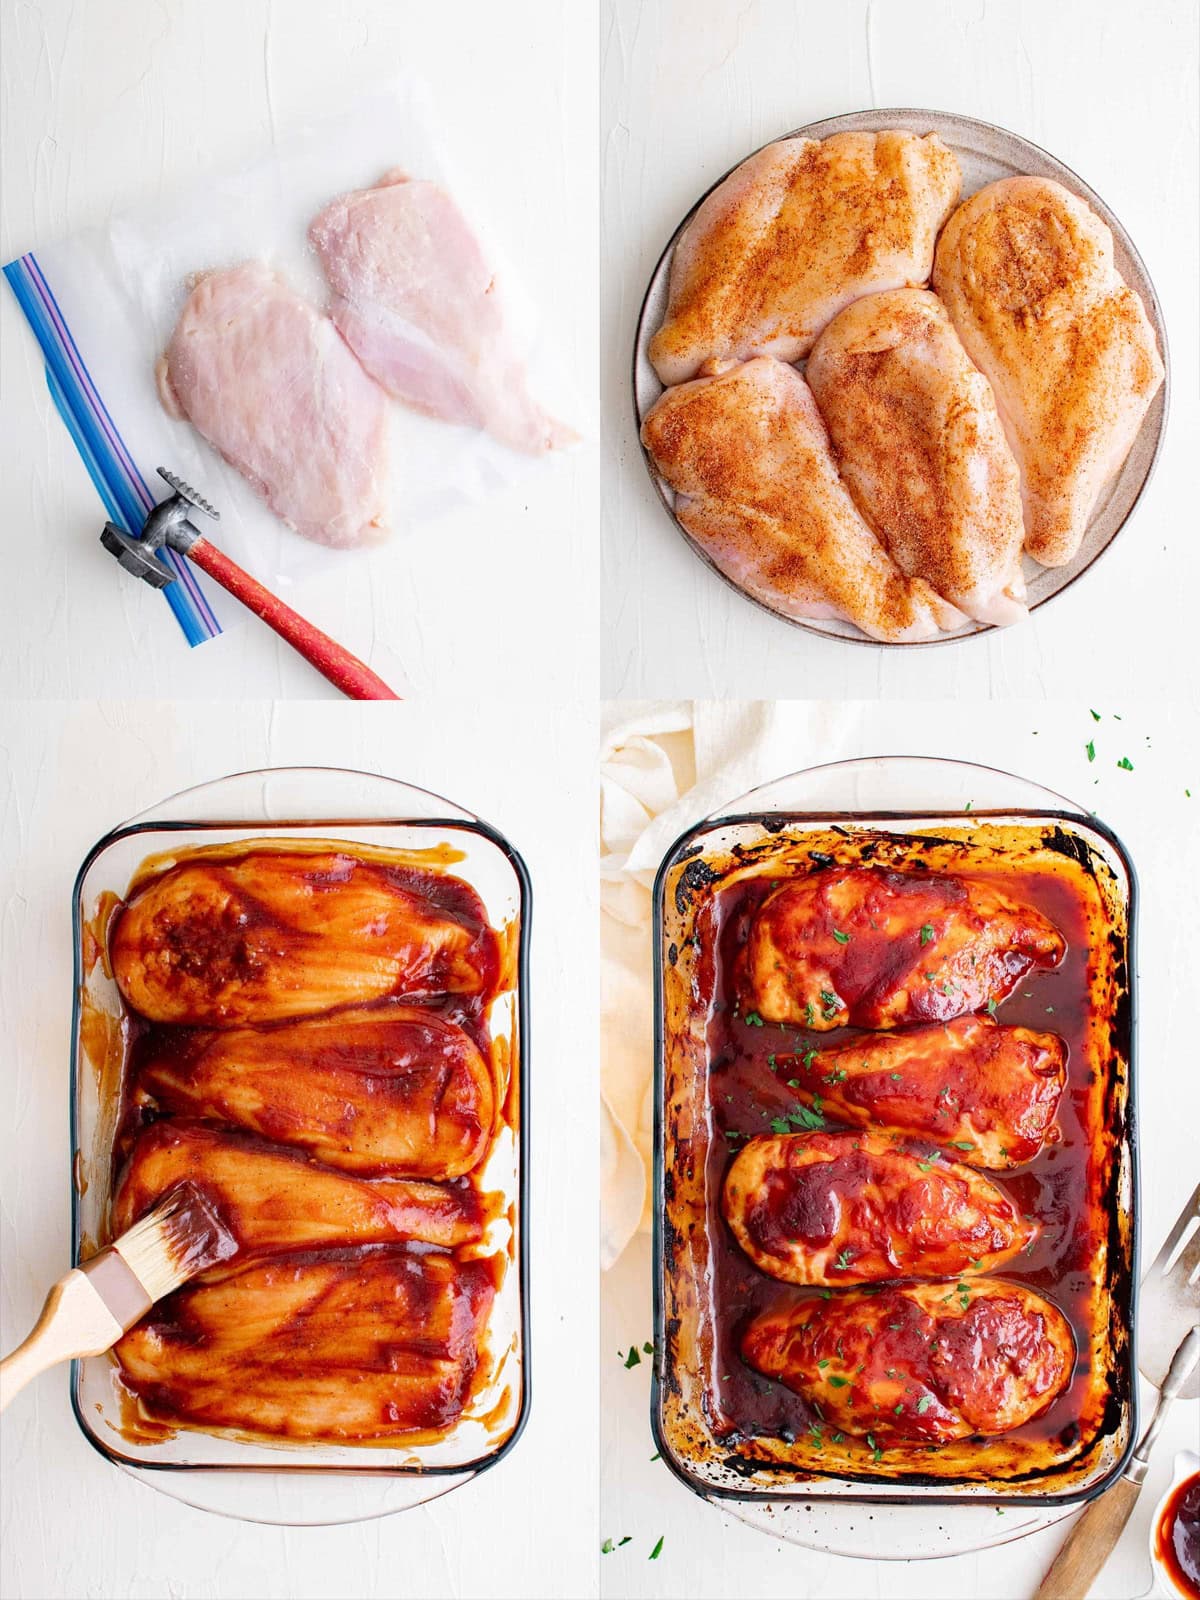 collage of images depicting the steps for making bbq chicken breasts.
